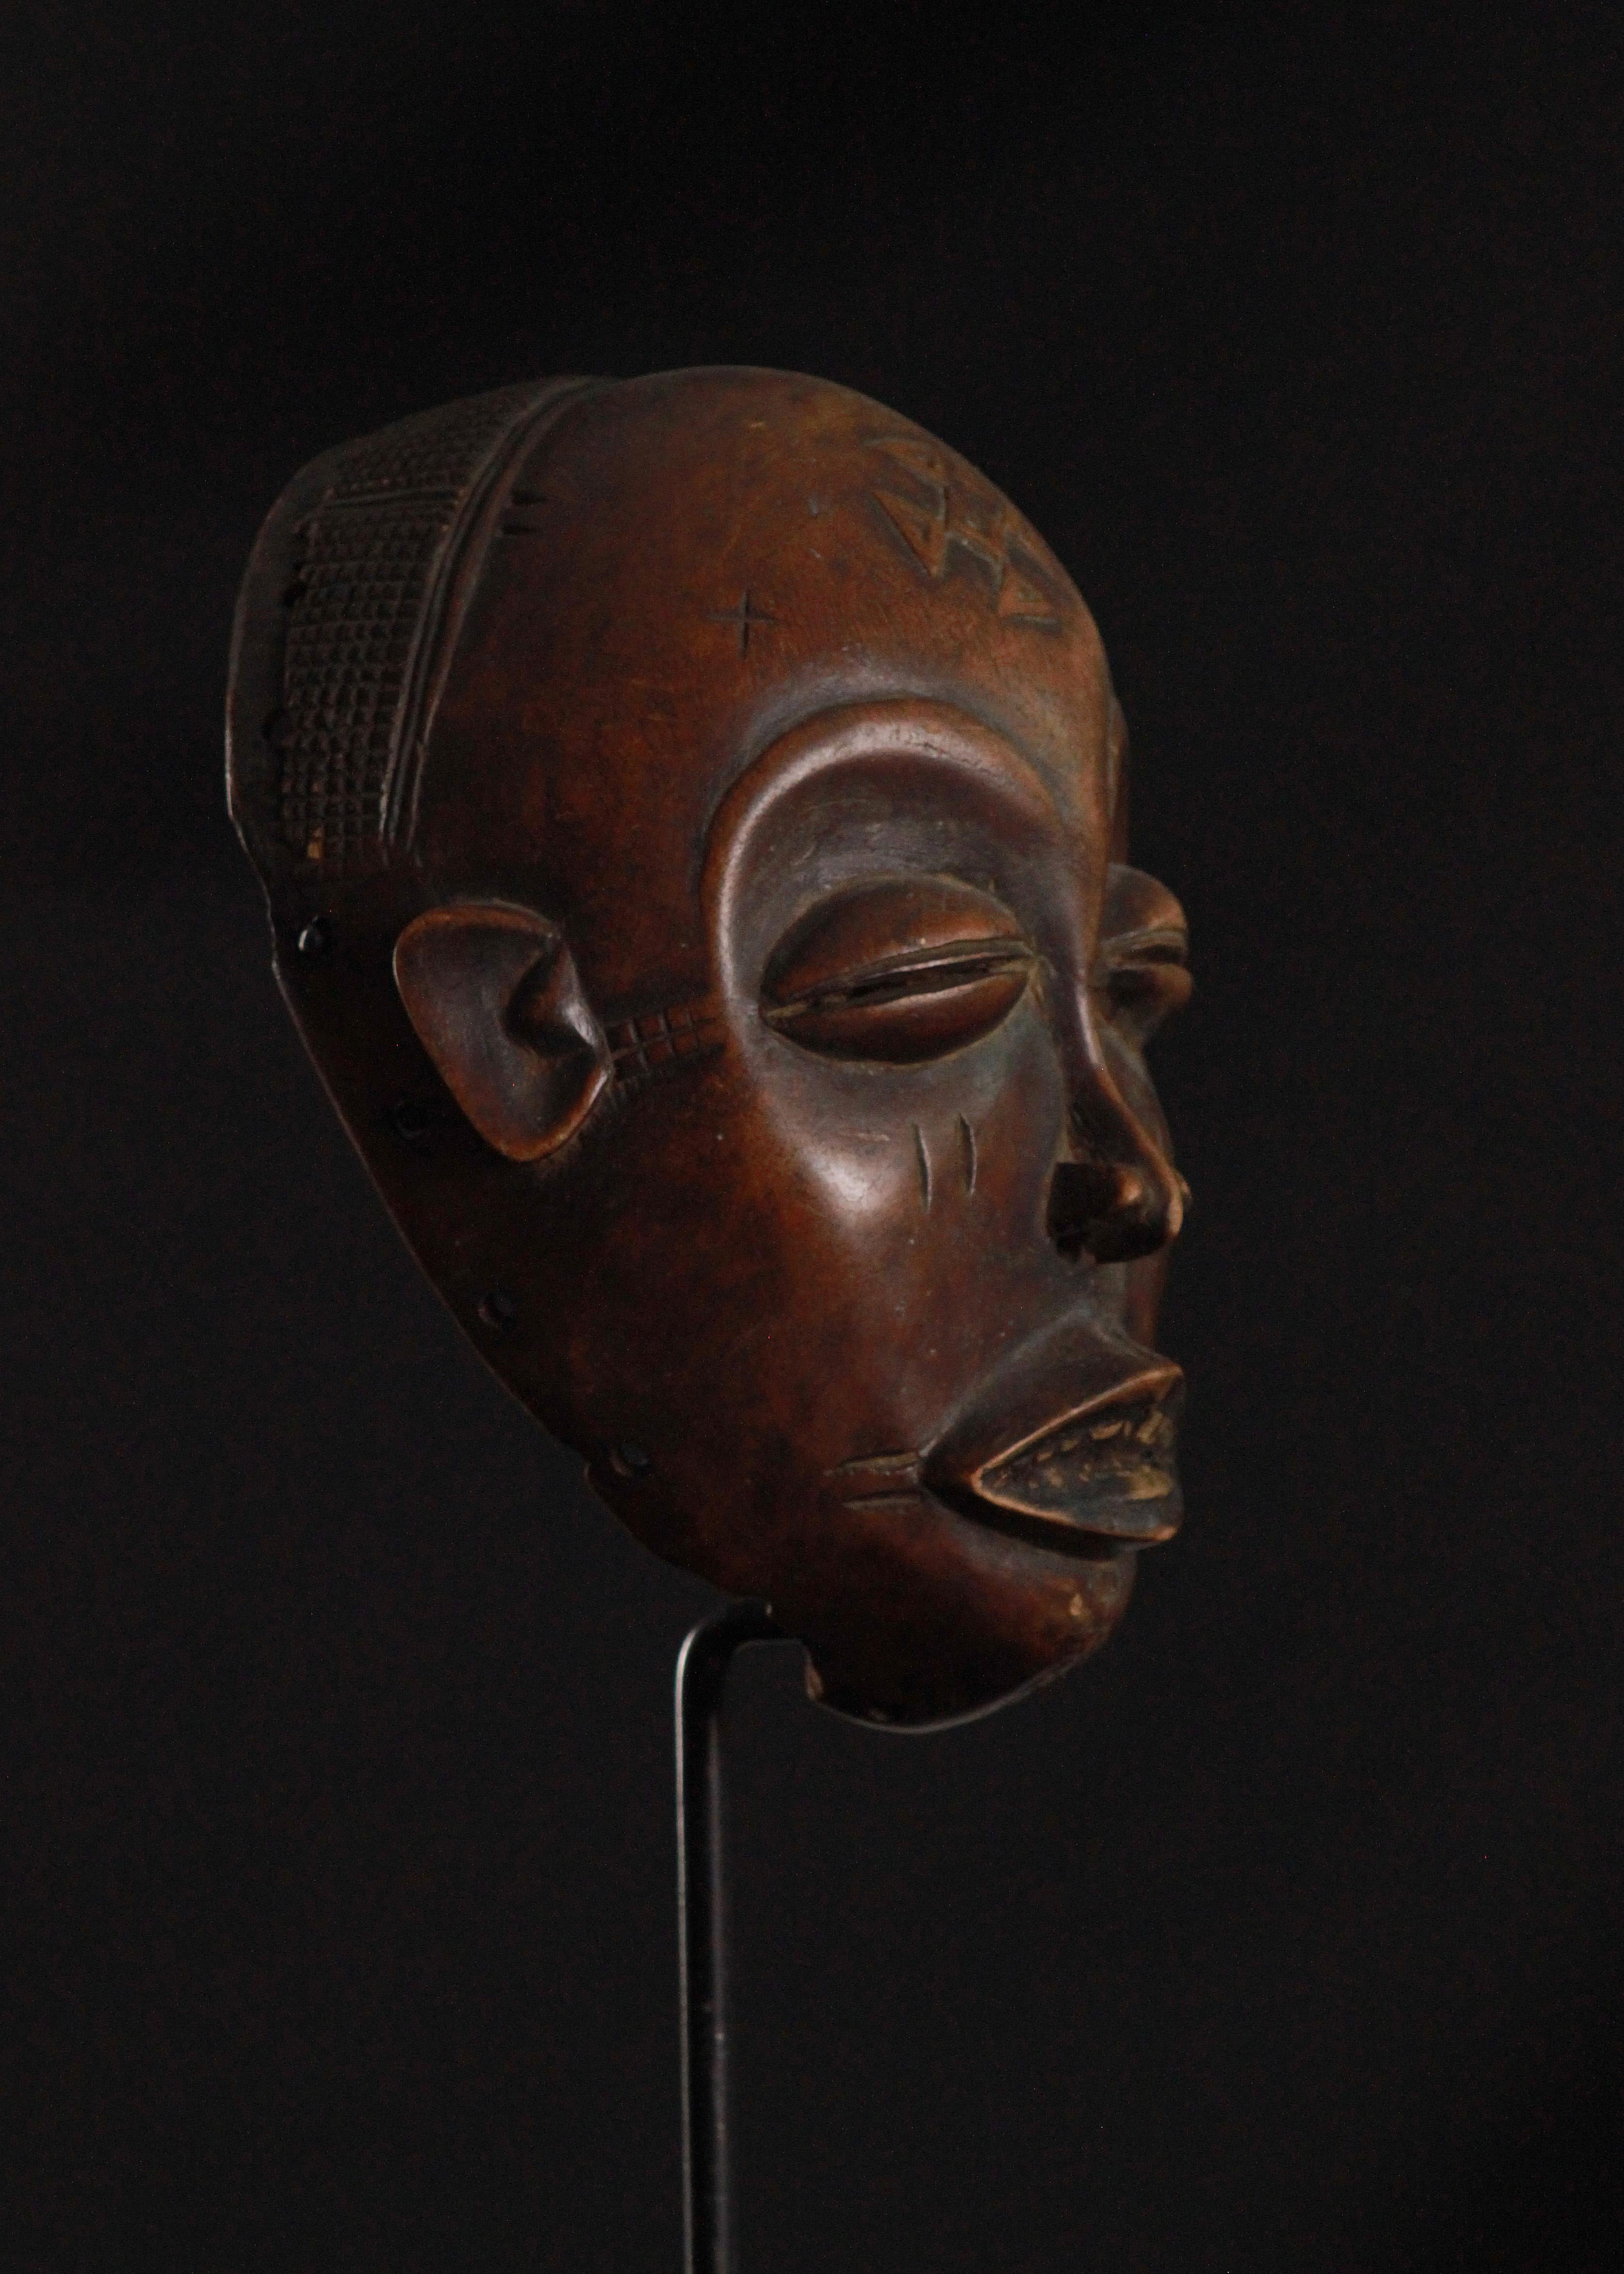 Congolese Chokwe Mask, Democratic Republic of The Congo 20th Century For Sale